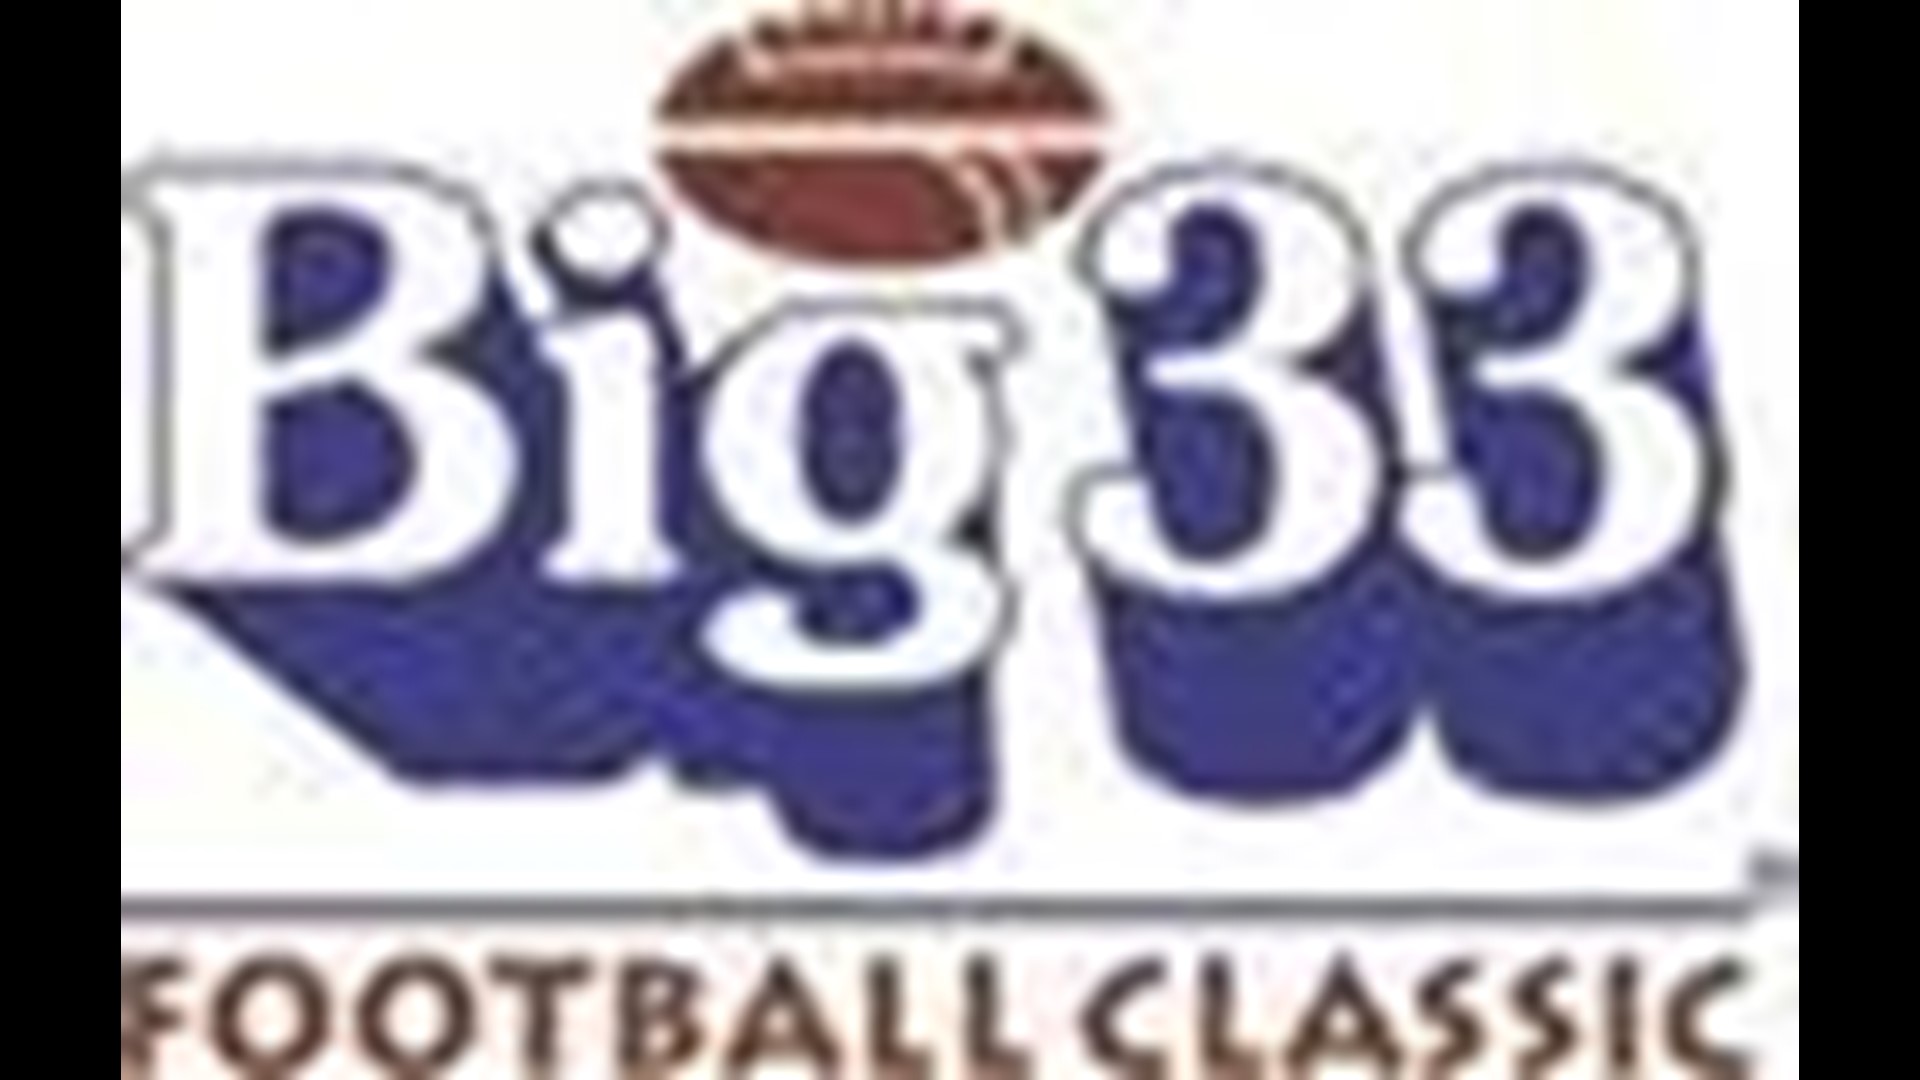 PA Big 33 roster announced